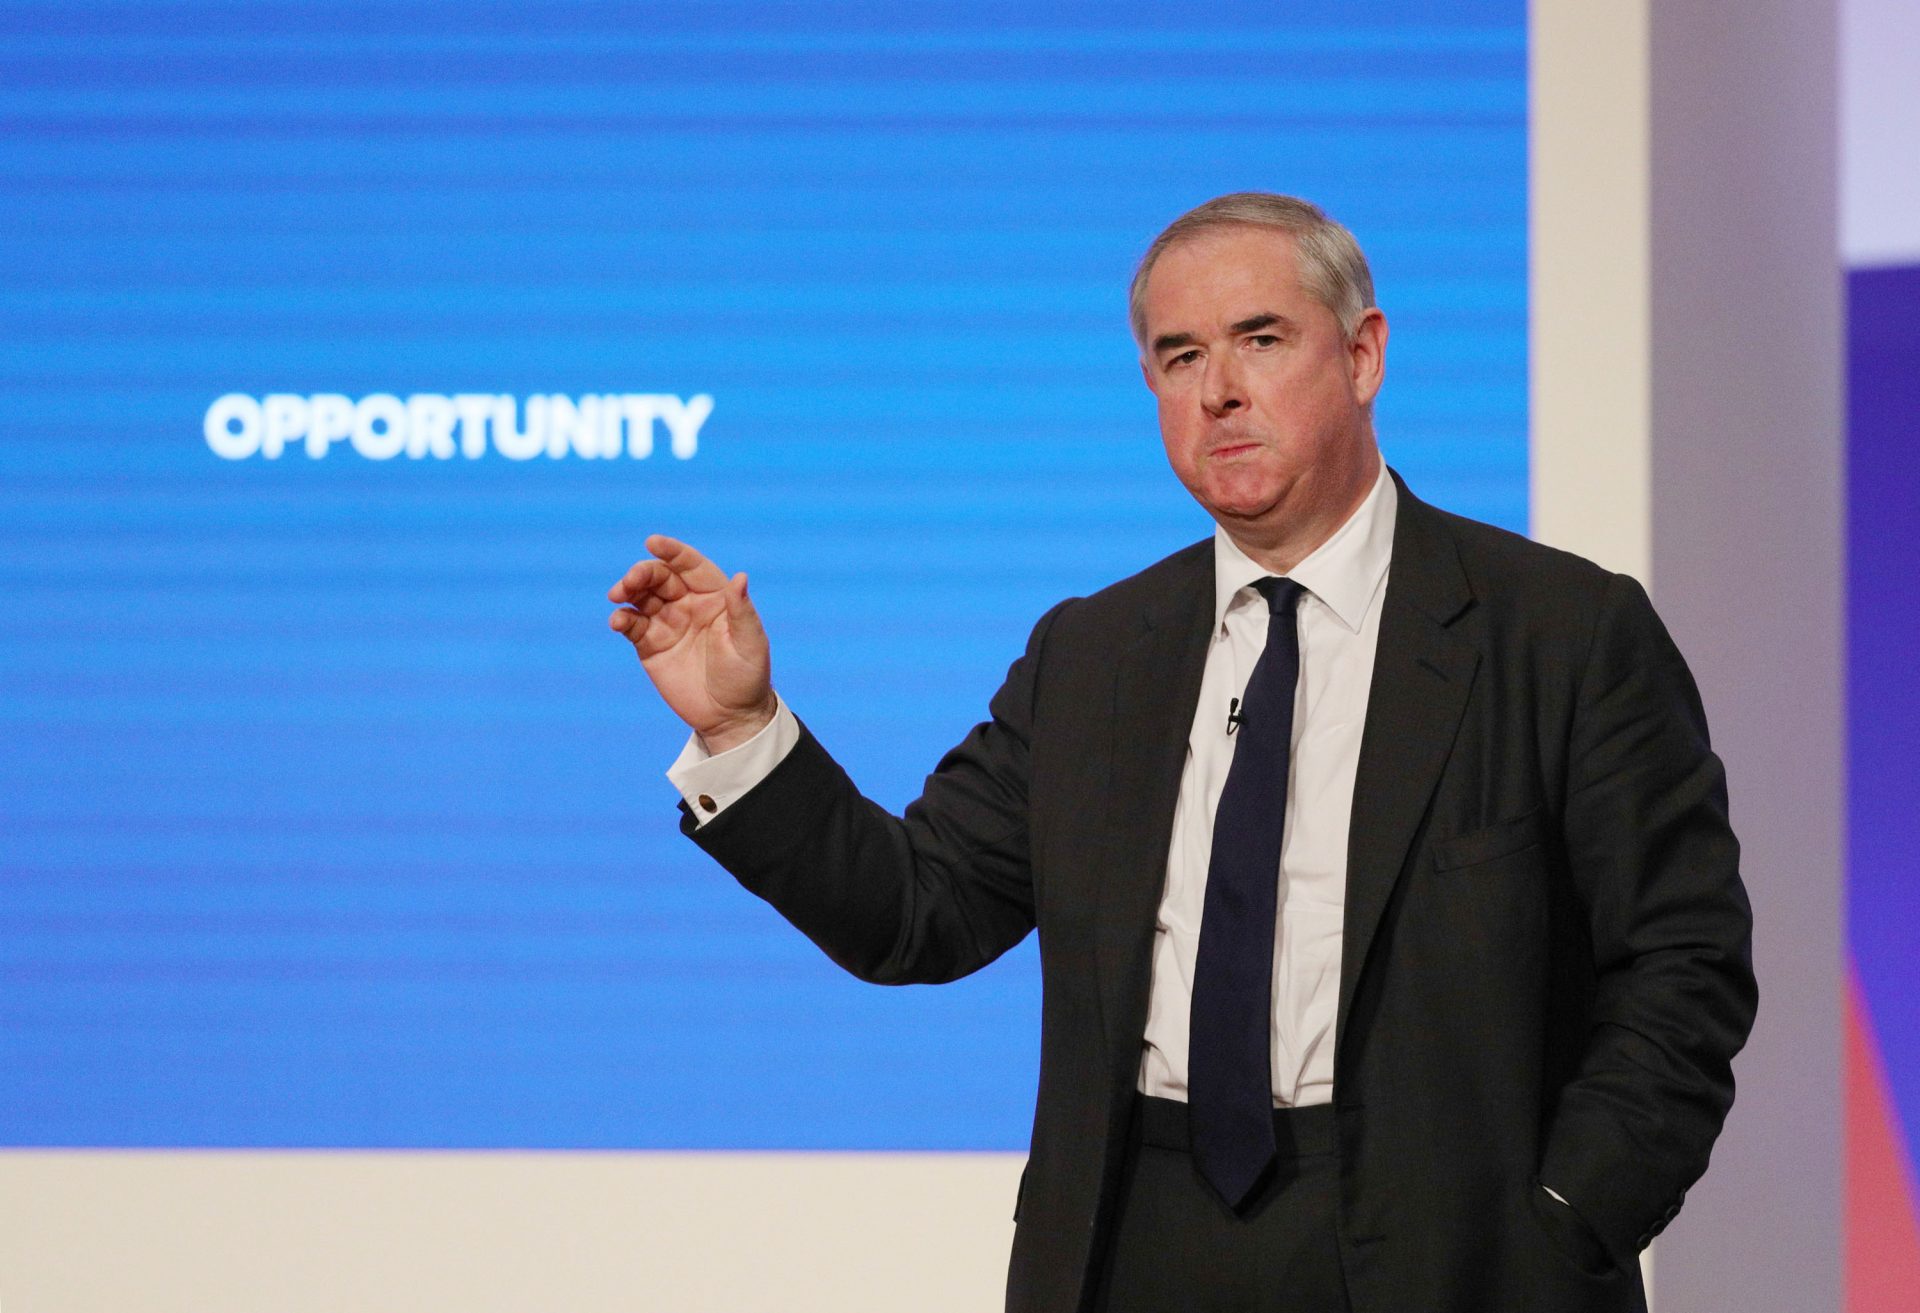 Geoffrey Cox at the 2018 Tory party conference. Photo: PA Images.